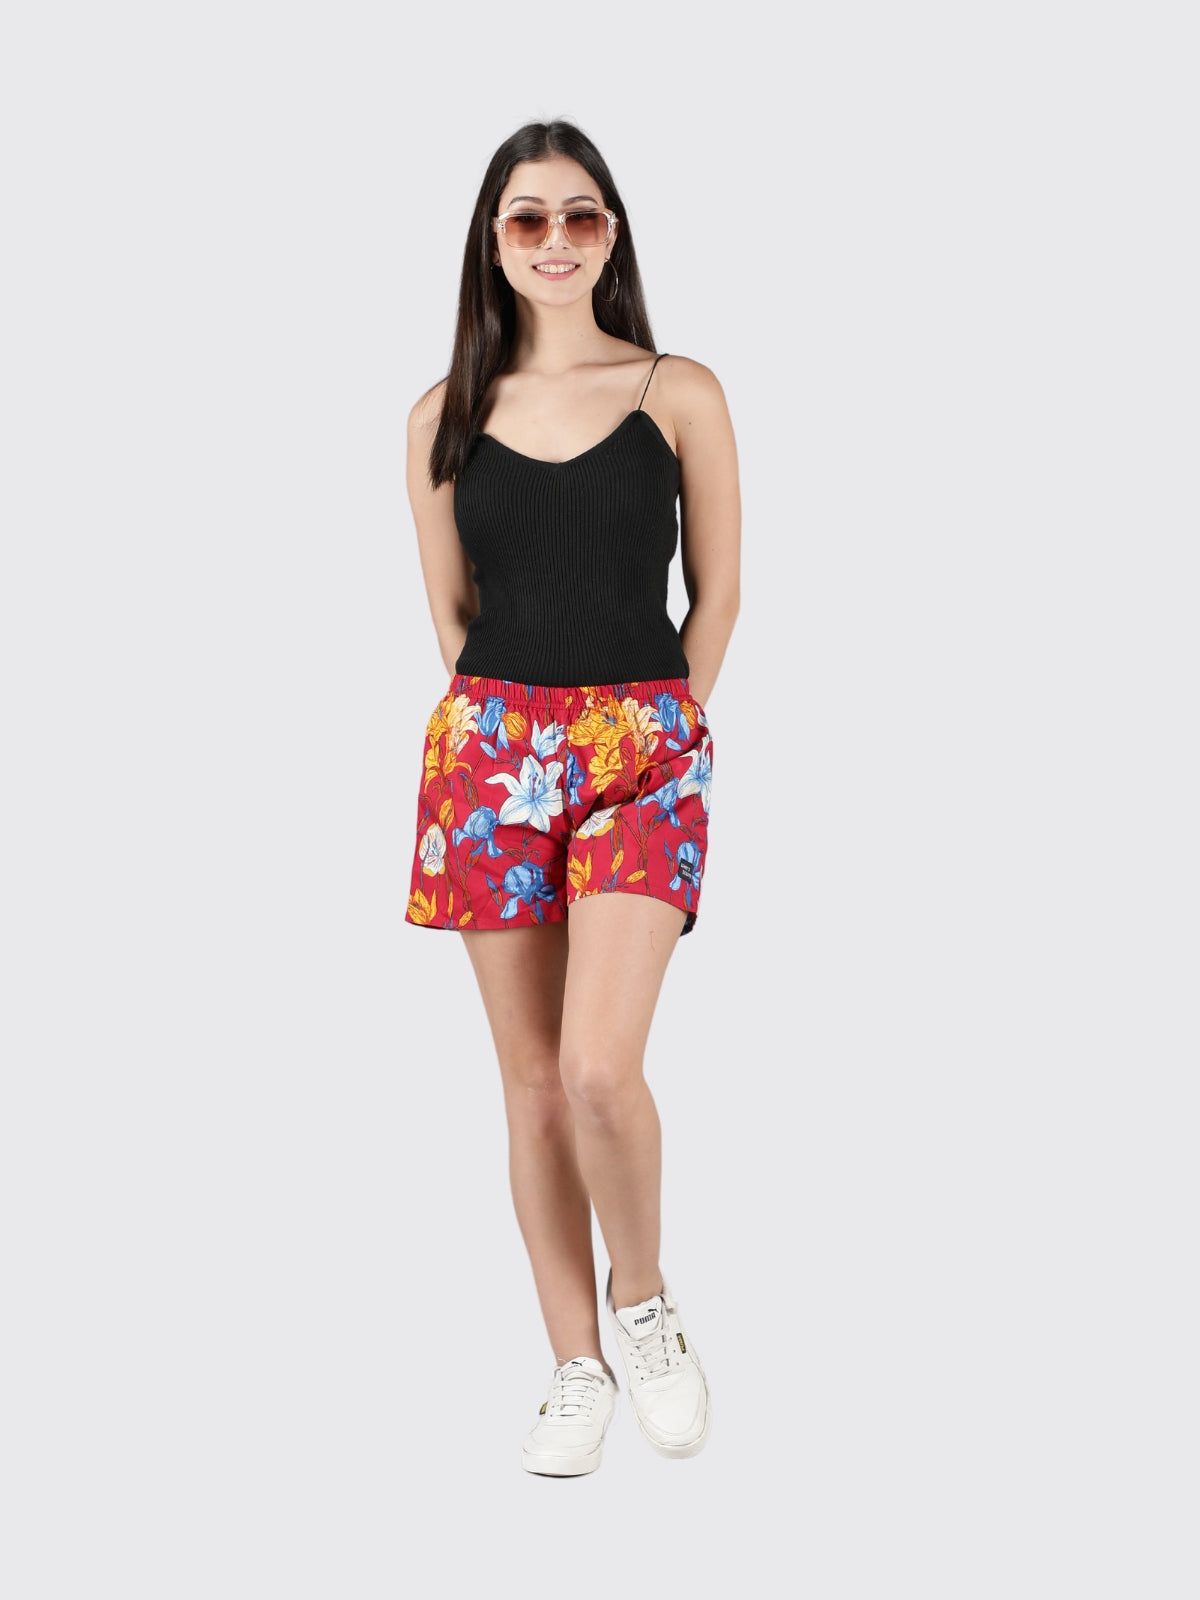 Red Floral Womens Boxers